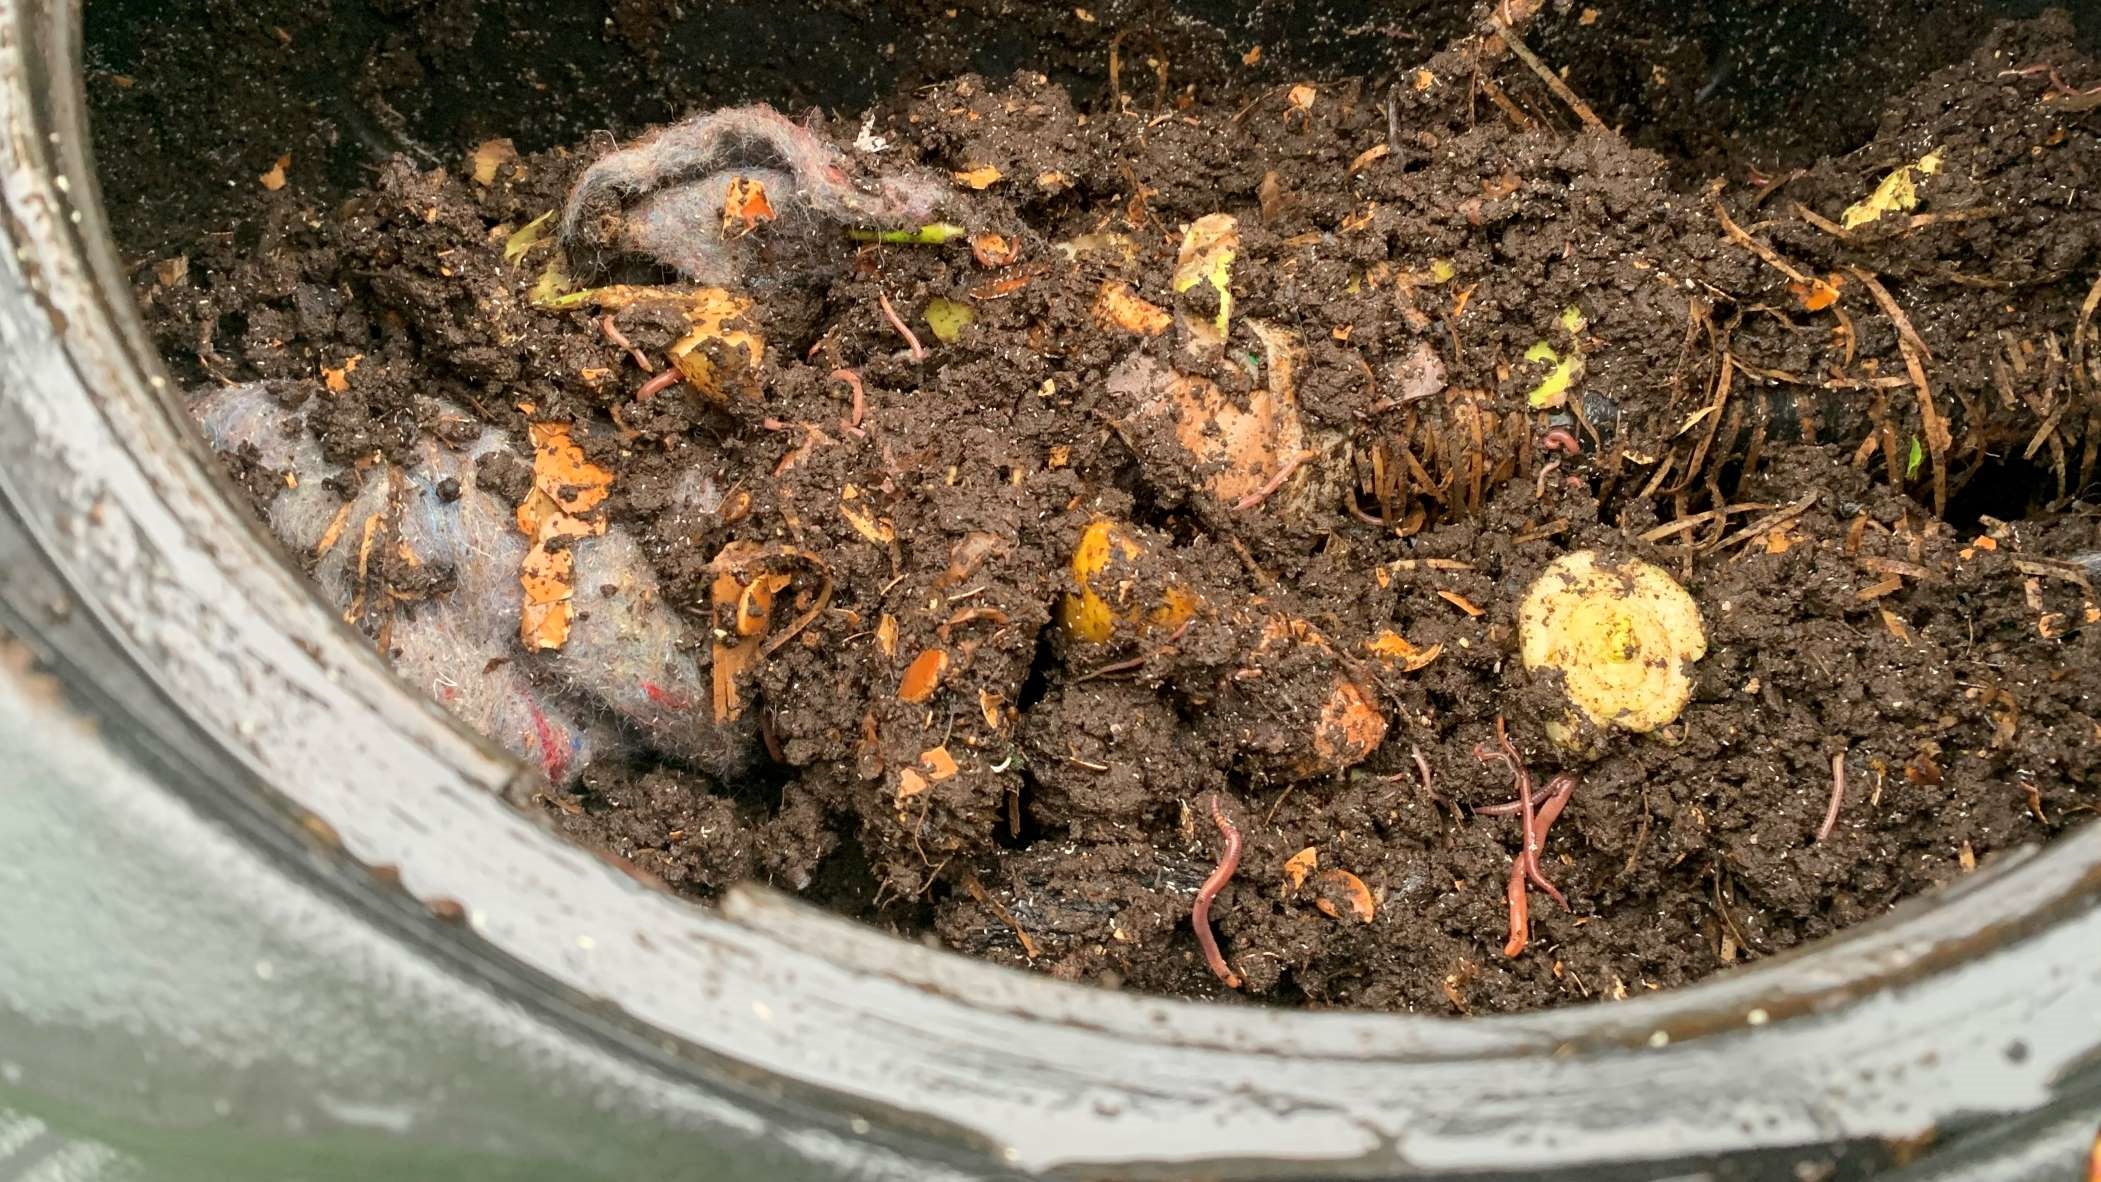 Photo shows interior of home compost bin, full of healthy compost with lots of worms. Most of the compost is broken down but you can also see some wool, straw, egg shell, fruit peel and vege scraps.